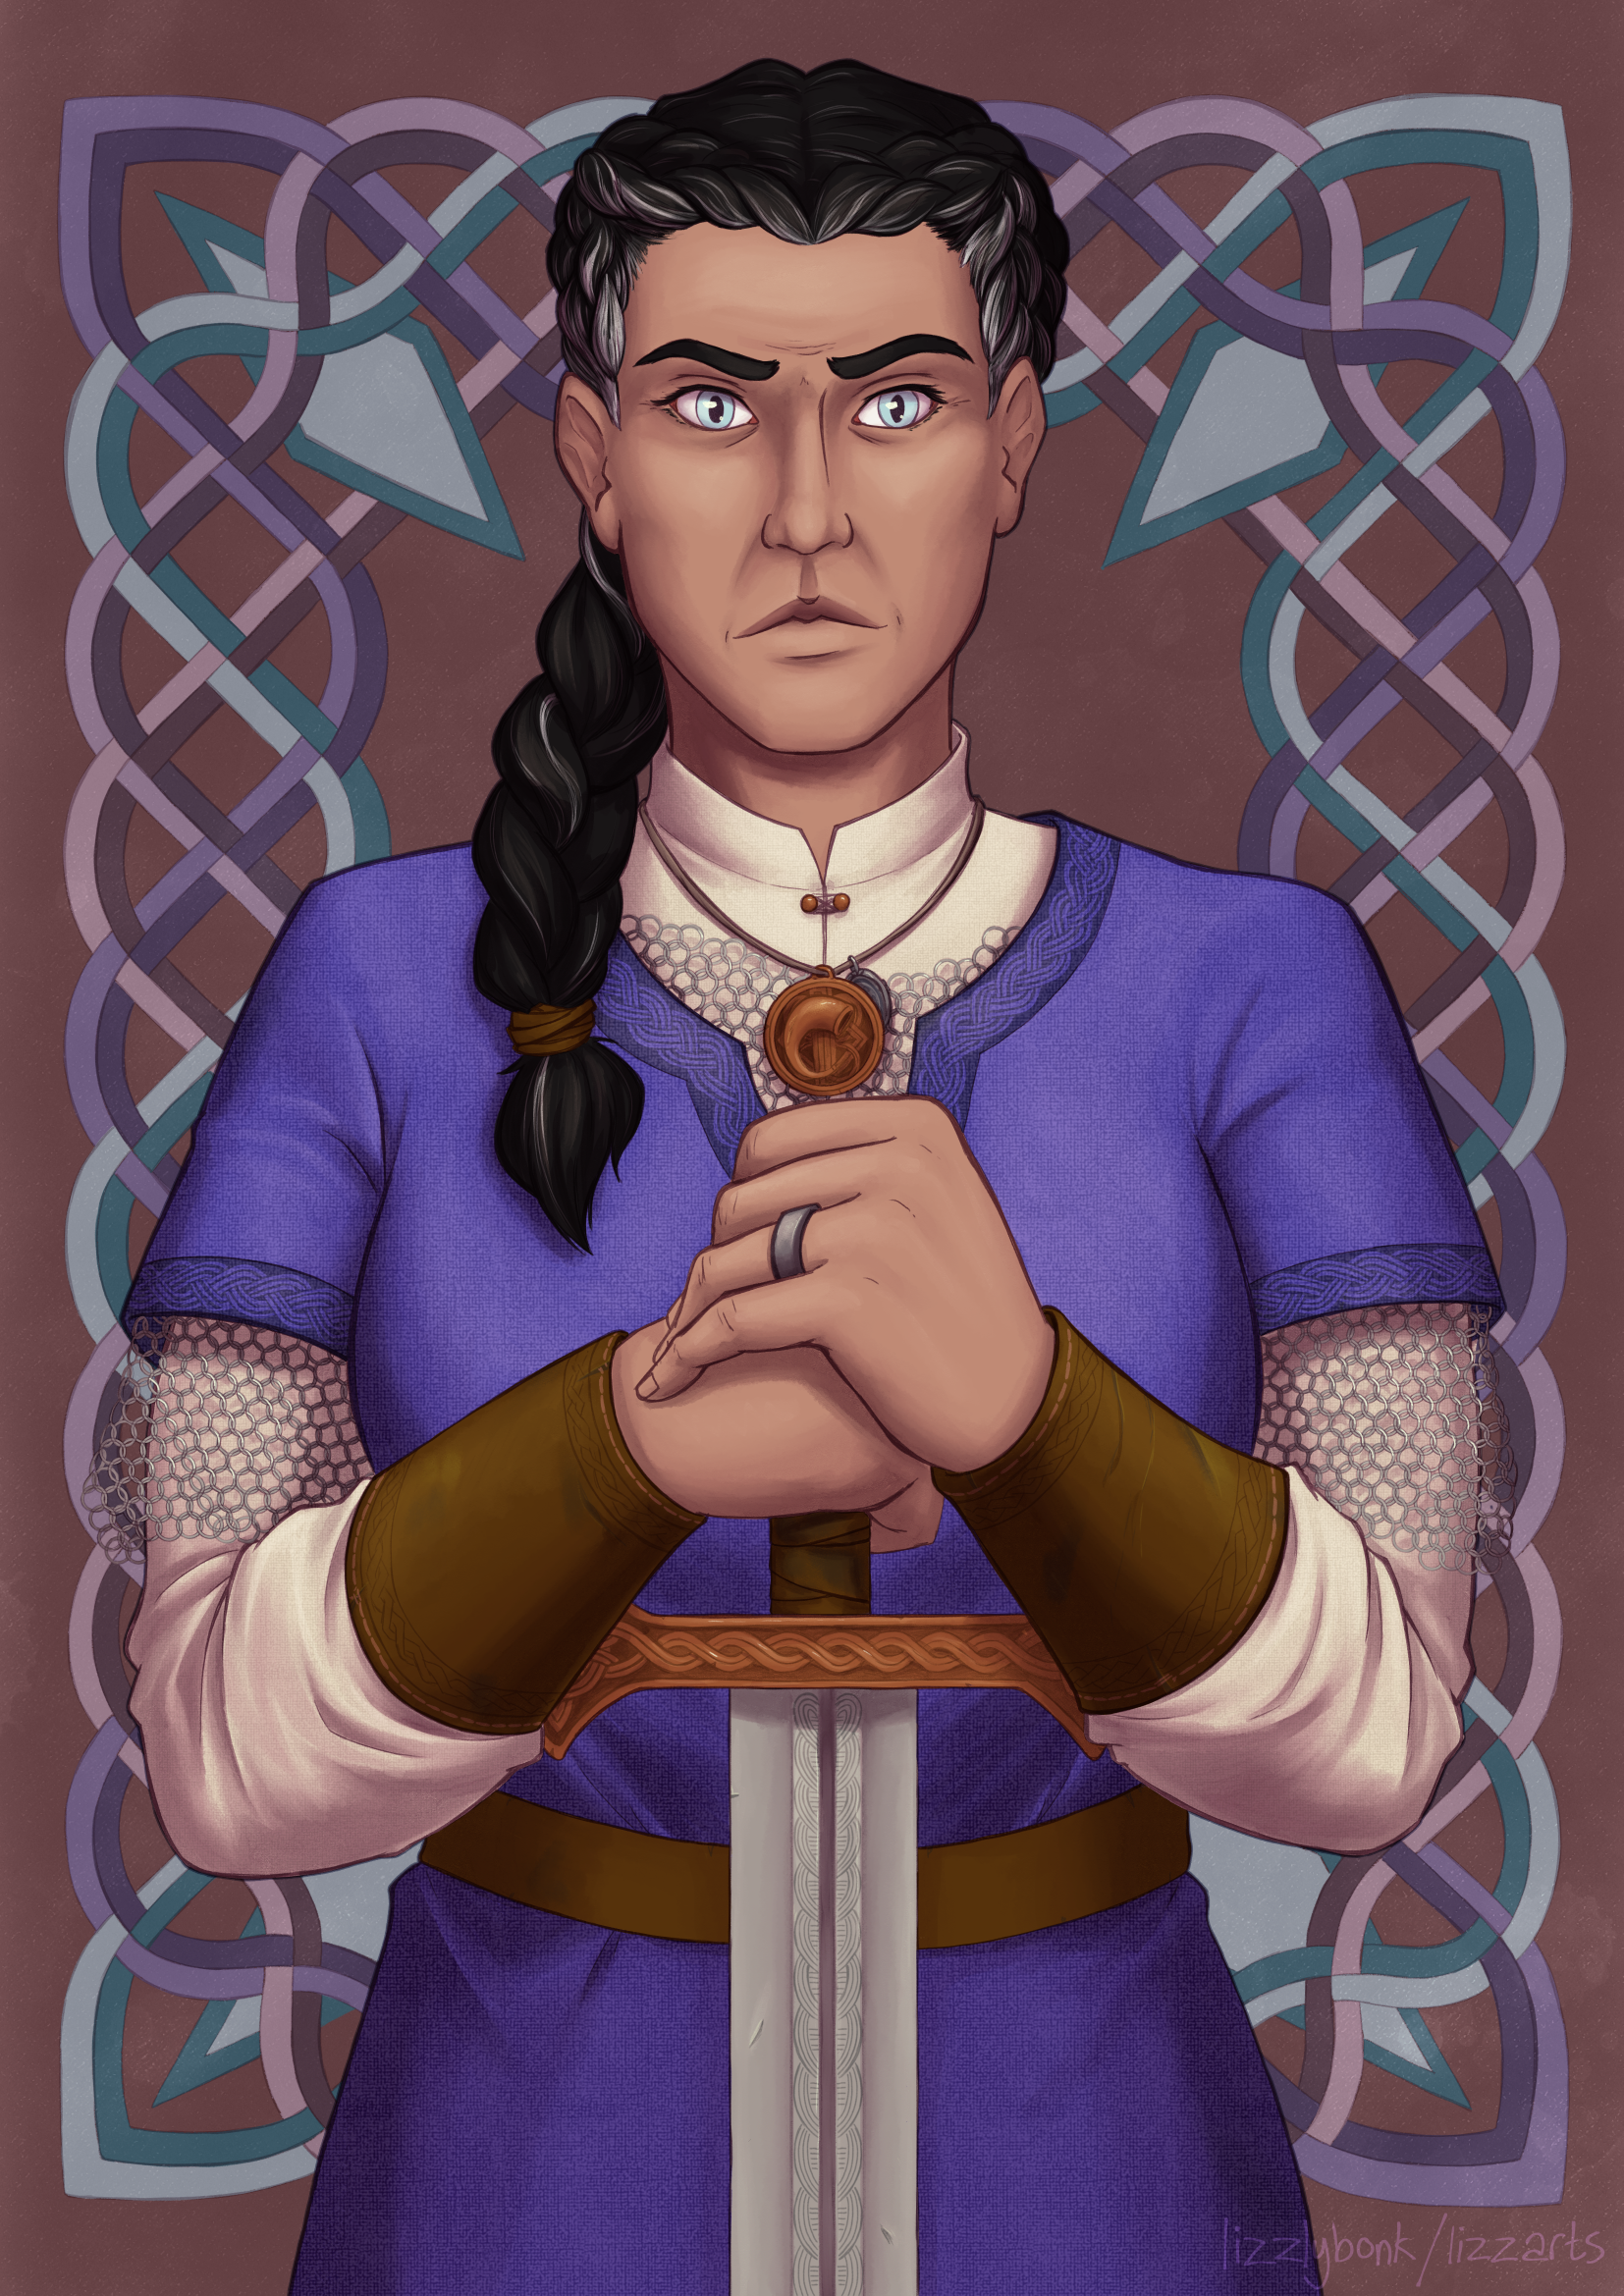 A piece of digital art depicting a pale-skinned woman with braided  black hair and pale blue eyes. She looks directly at the viewer. She wears blue viking-inspired fantasy clothing and holds a sword with knotwork on the hilt. There is a knotwork motif behind her.